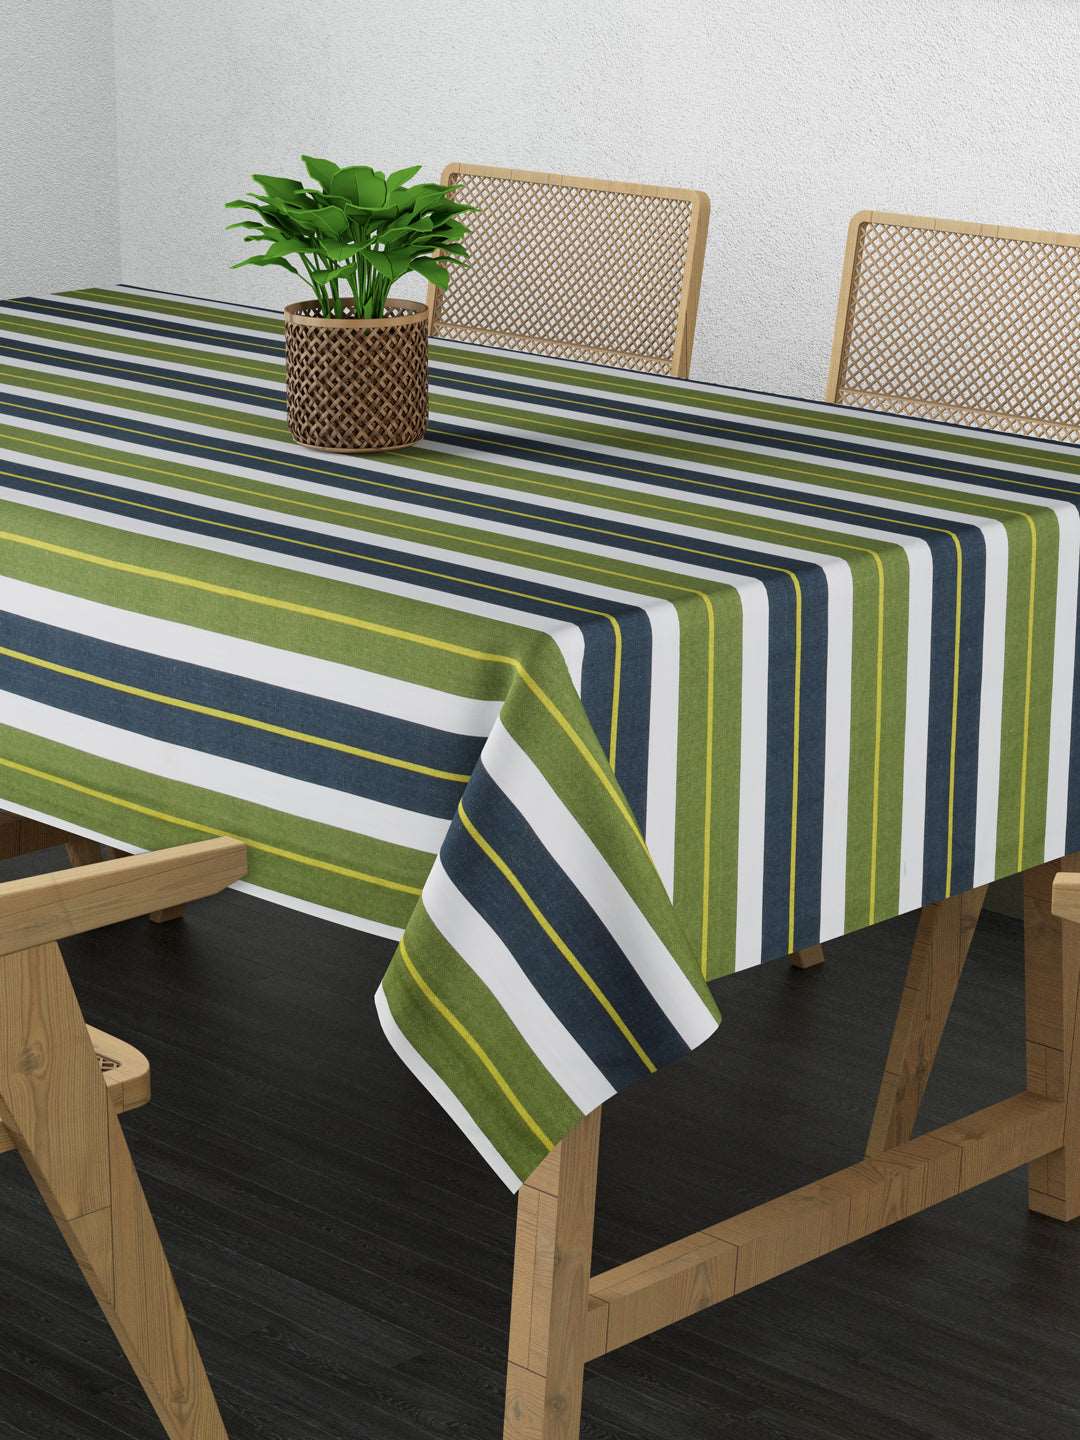 100% Cotton Table Cover 6 Seater, Grey, White & Green